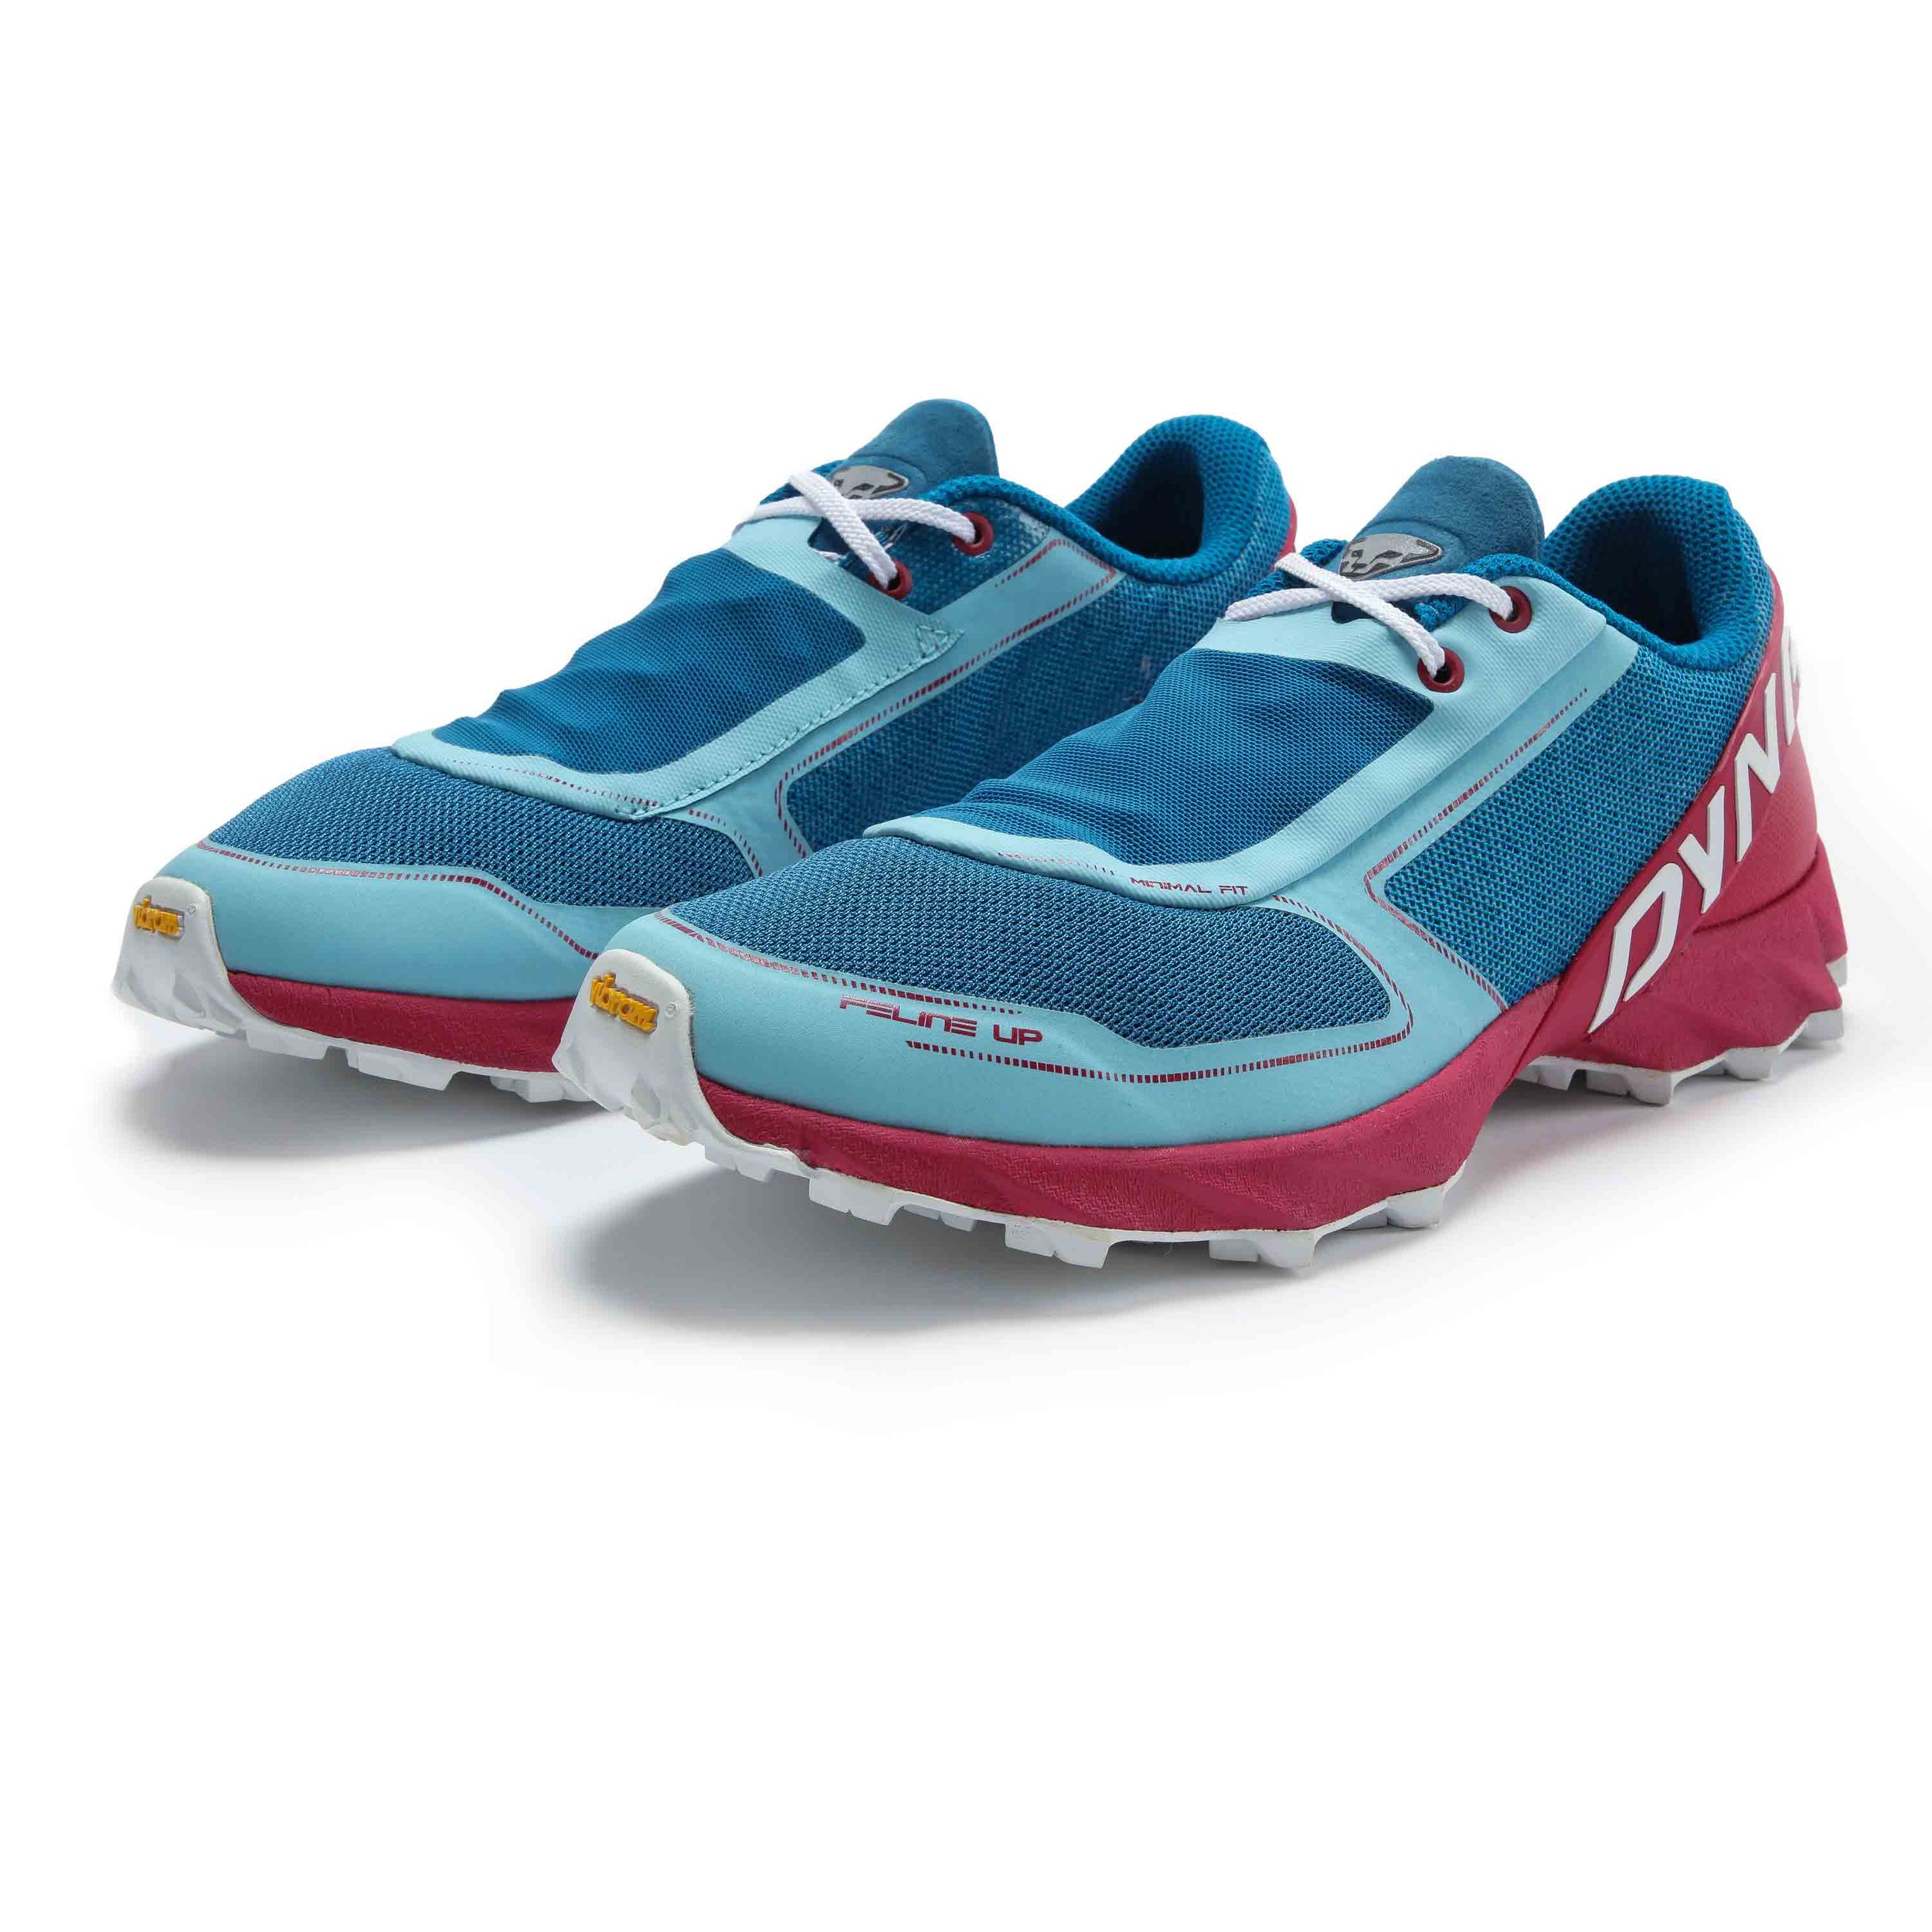 Dynafit Feline Up Women's Trail Running Shoes - AW20